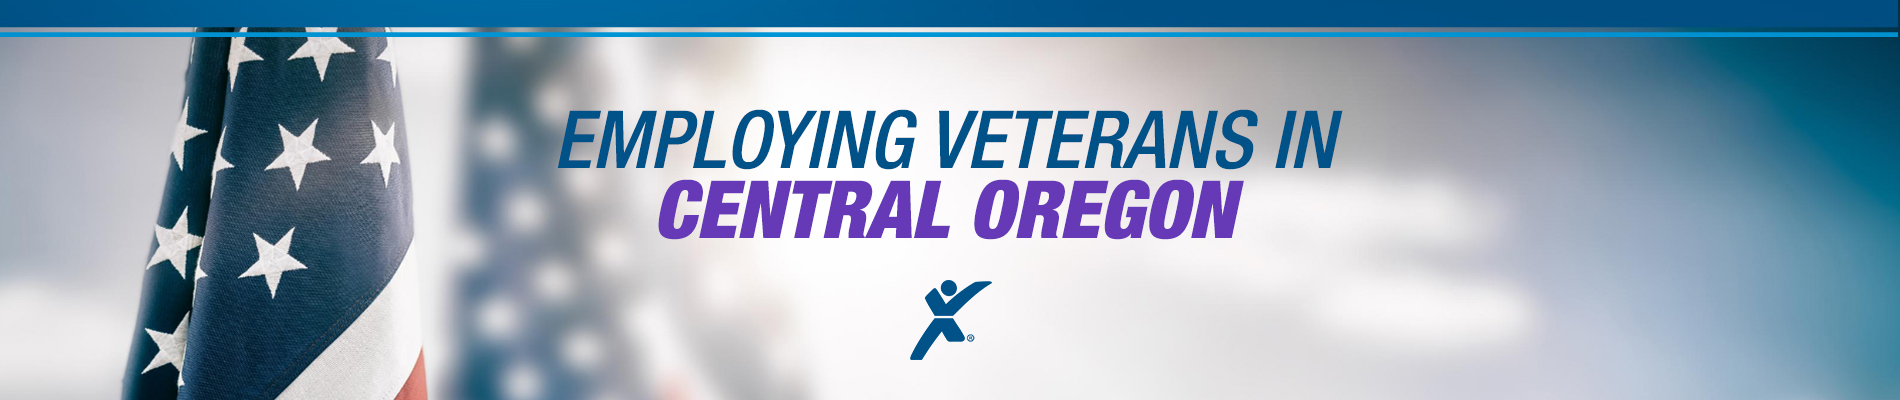 Express Bend - Employing Veterans in Central Oregon